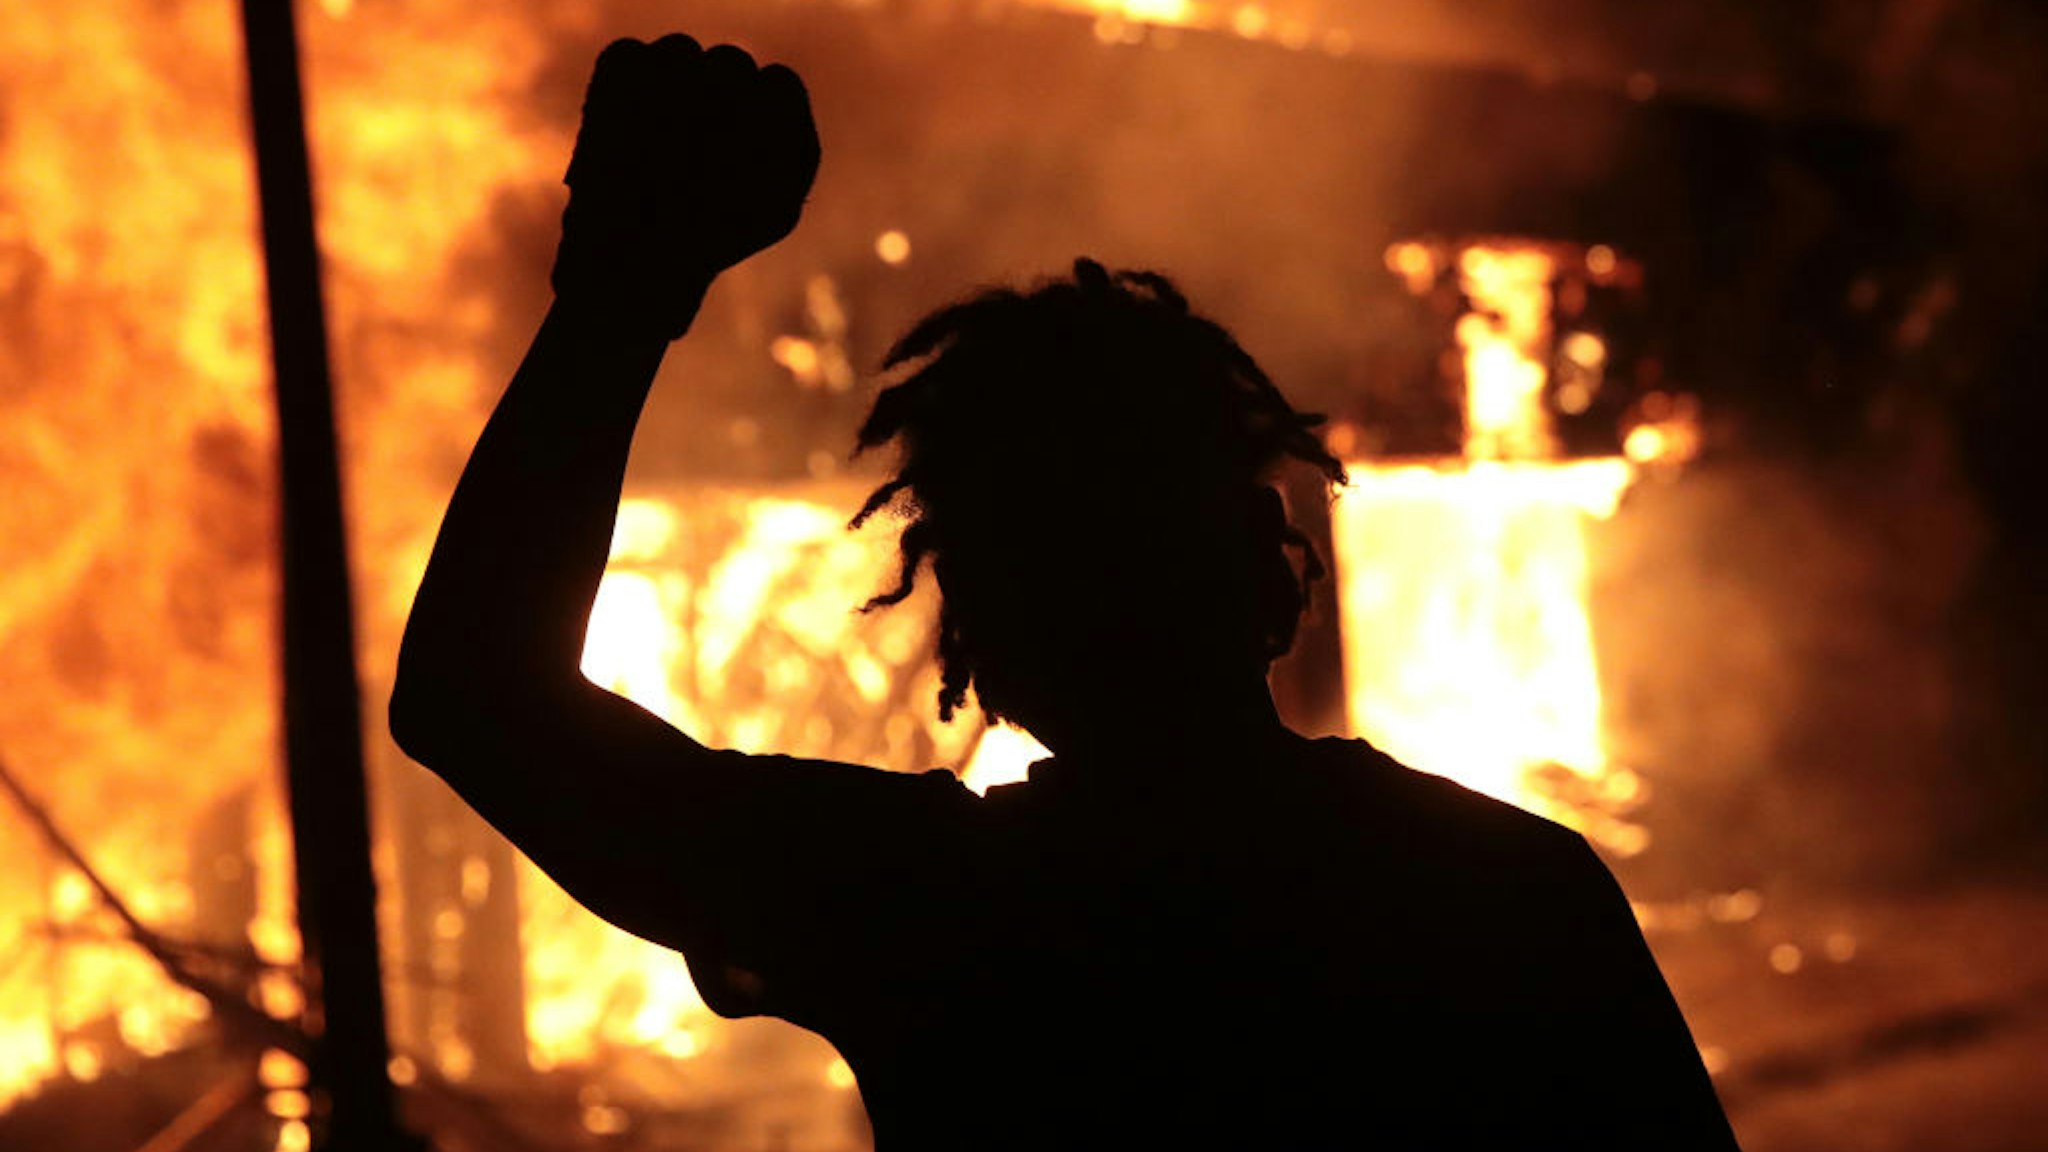 MINNEAPOLIS, MINNESOTA - MAY 29: A man raises his fist in front of a burning building during protests sparked by the death of George Floyd while in police custody on May 29, 2020 in Minneapolis, Minnesota. Earlier today, former Minneapolis police officer Derek Chauvin was taken into custody for Floyd's death. Chauvin has been accused of kneeling on Floyd's neck as he pleaded with him about not being able to breathe. Floyd was pronounced dead a short while later. Chauvin and 3 other officers, who were involved in the arrest, were fired from the police department after a video of the arrest was circulated. (Photo by Scott Olson/Getty Images)